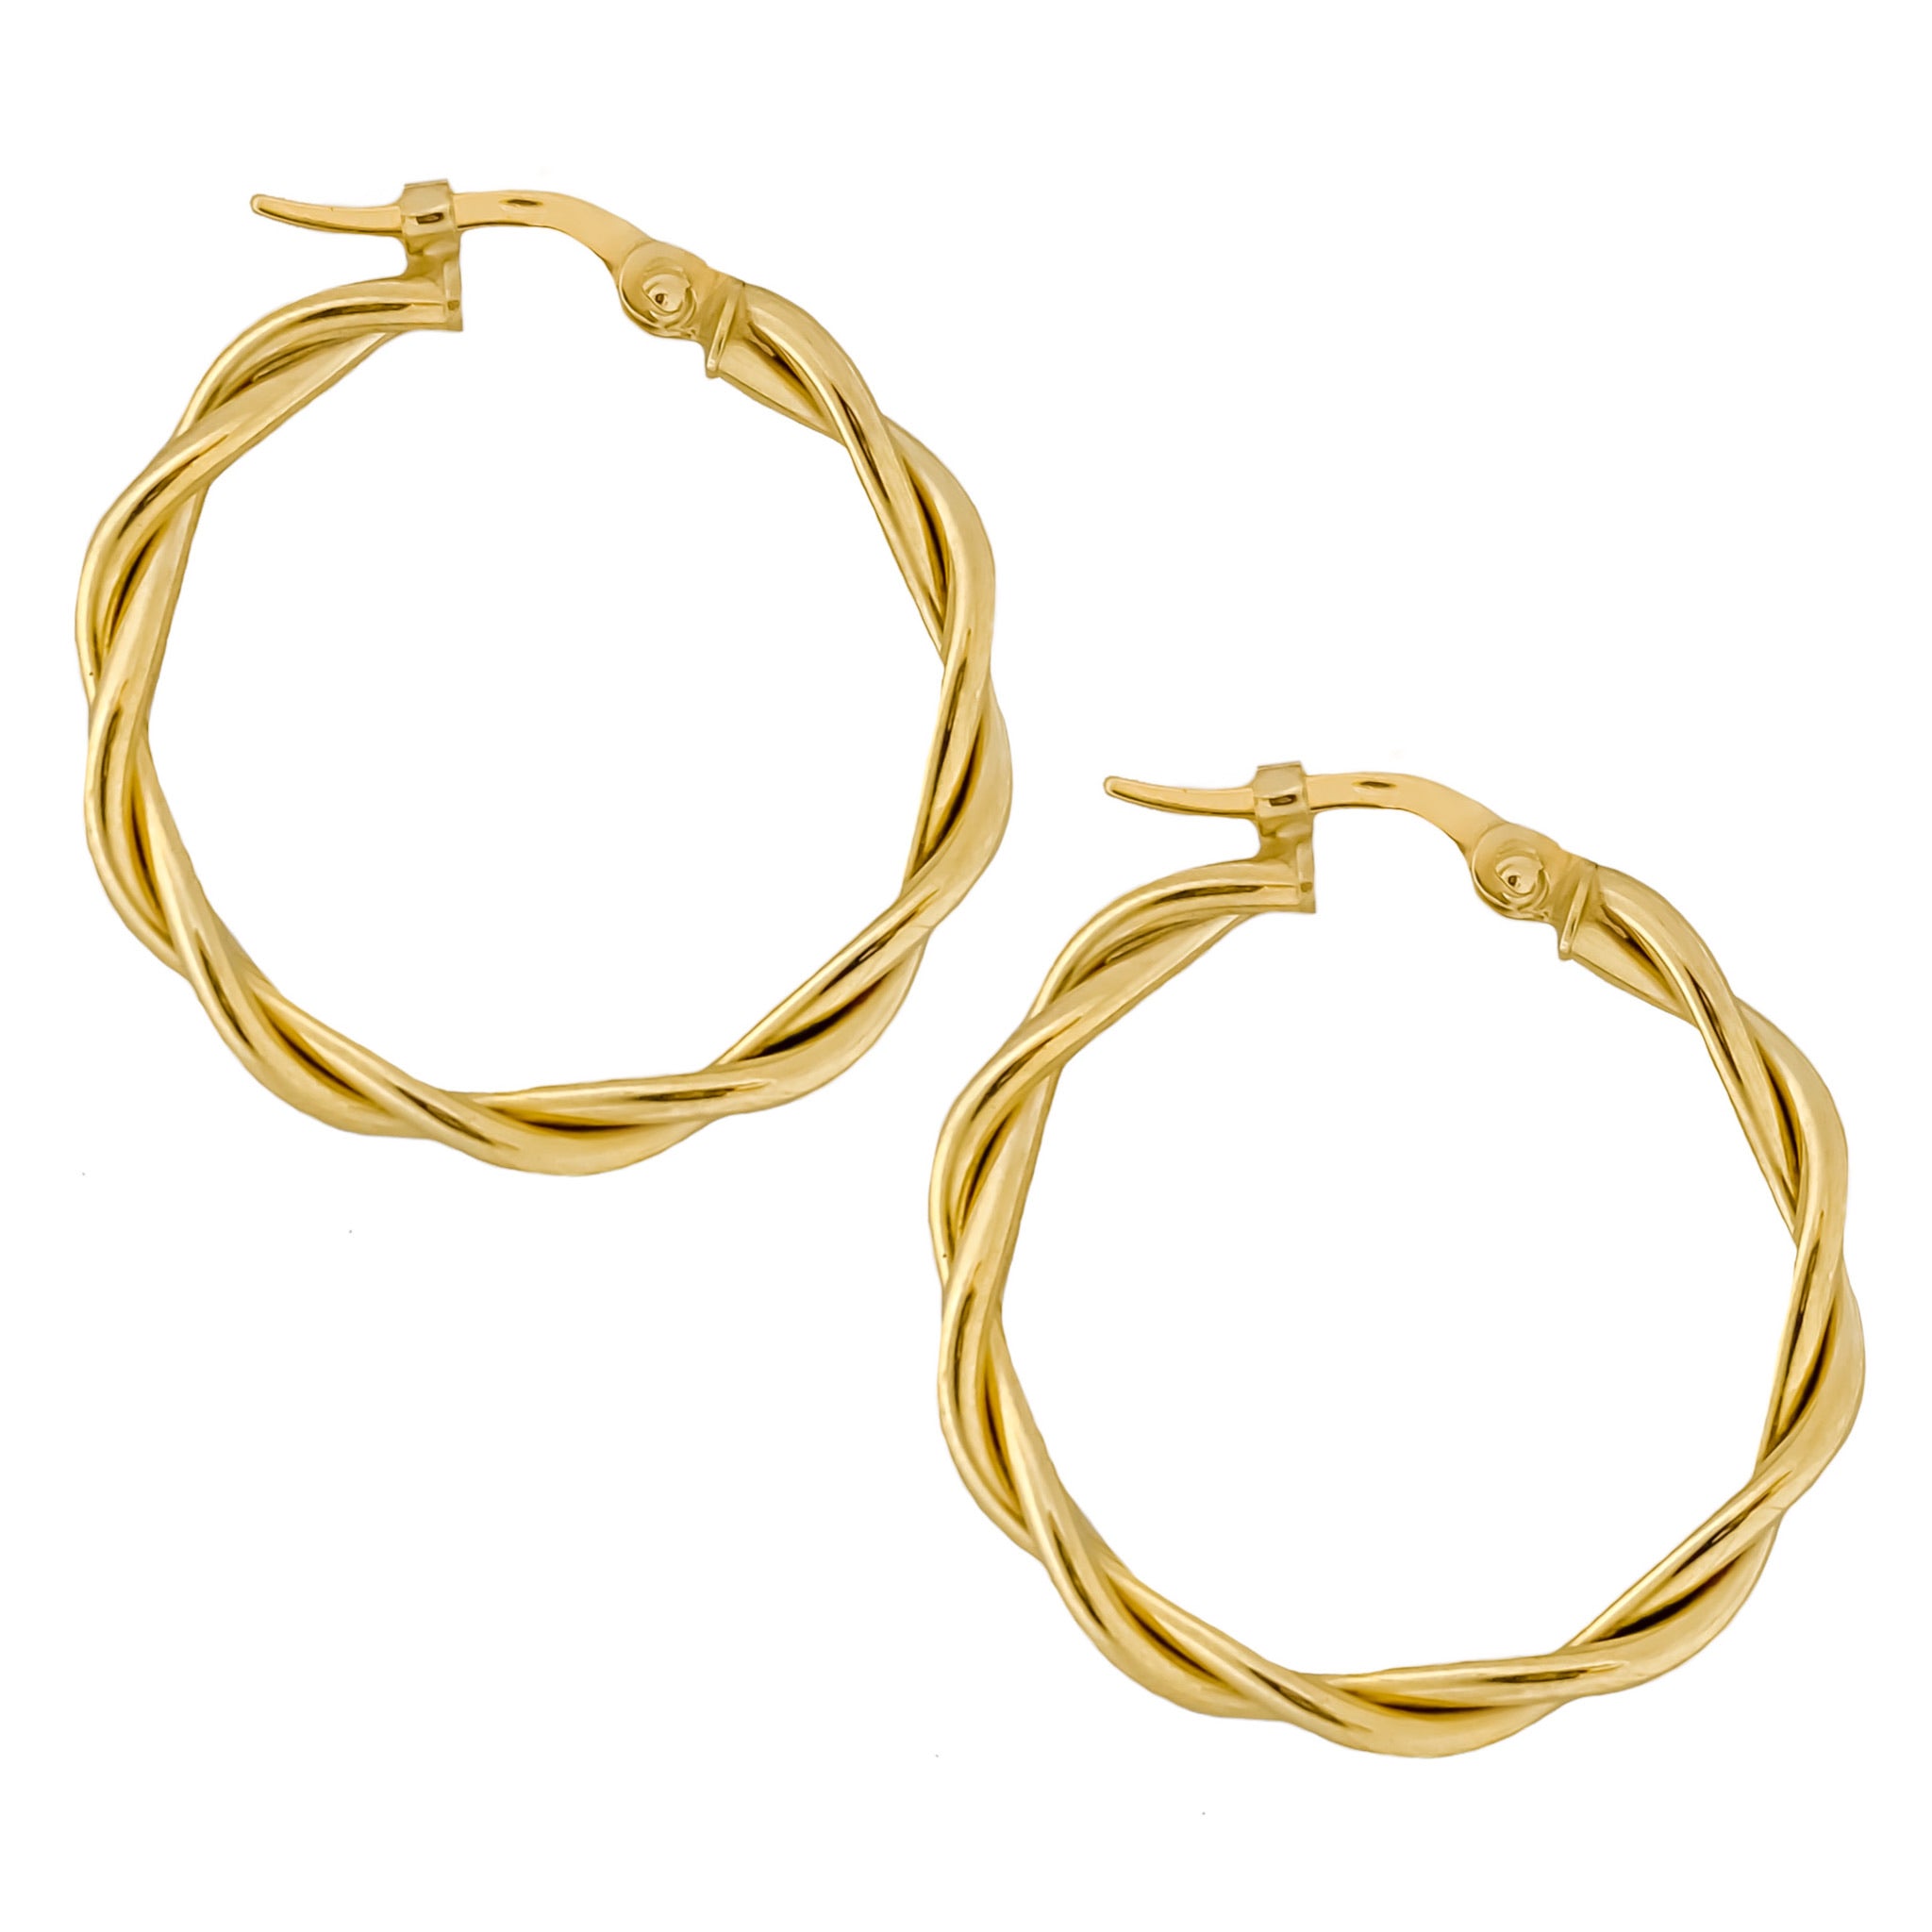 14K YELLOW GOLD BRAIDED HOOPS